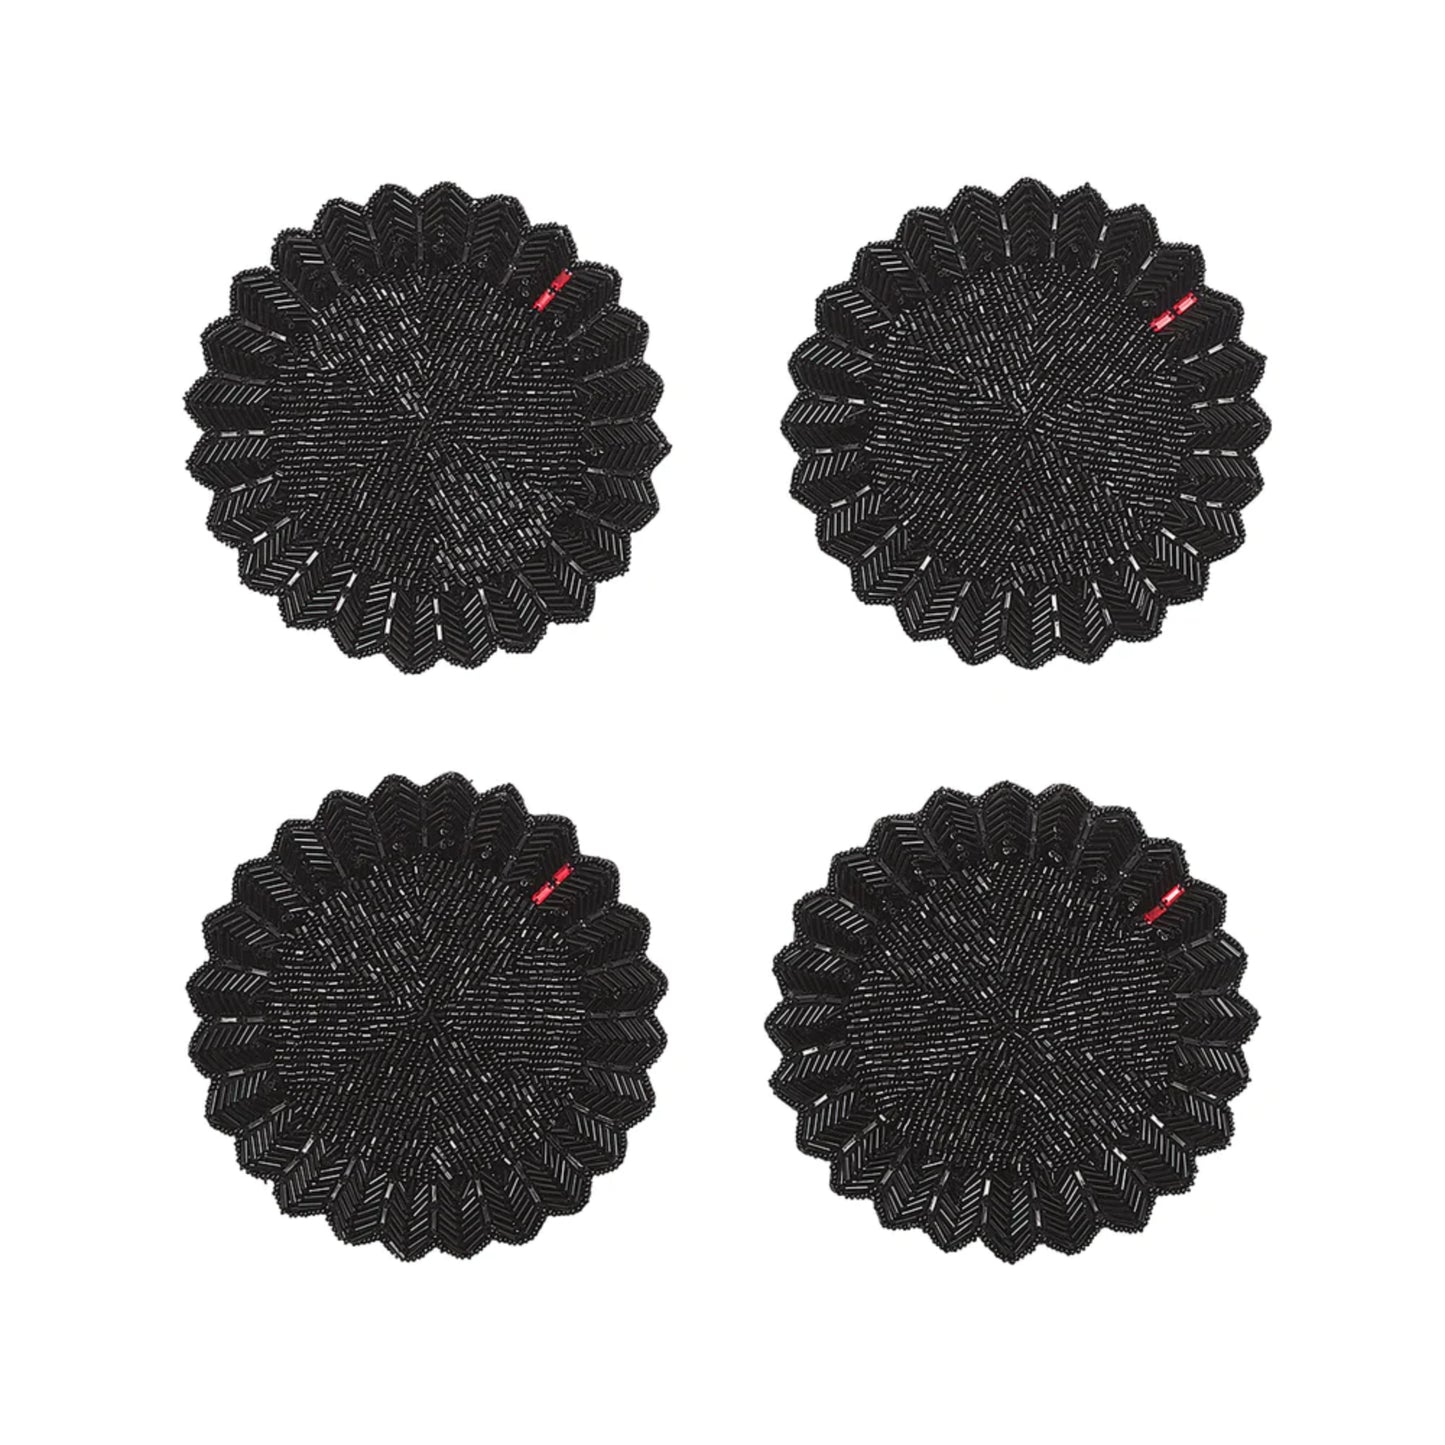 Etoile Coasters in Black - Set of 4 - in Gift Box